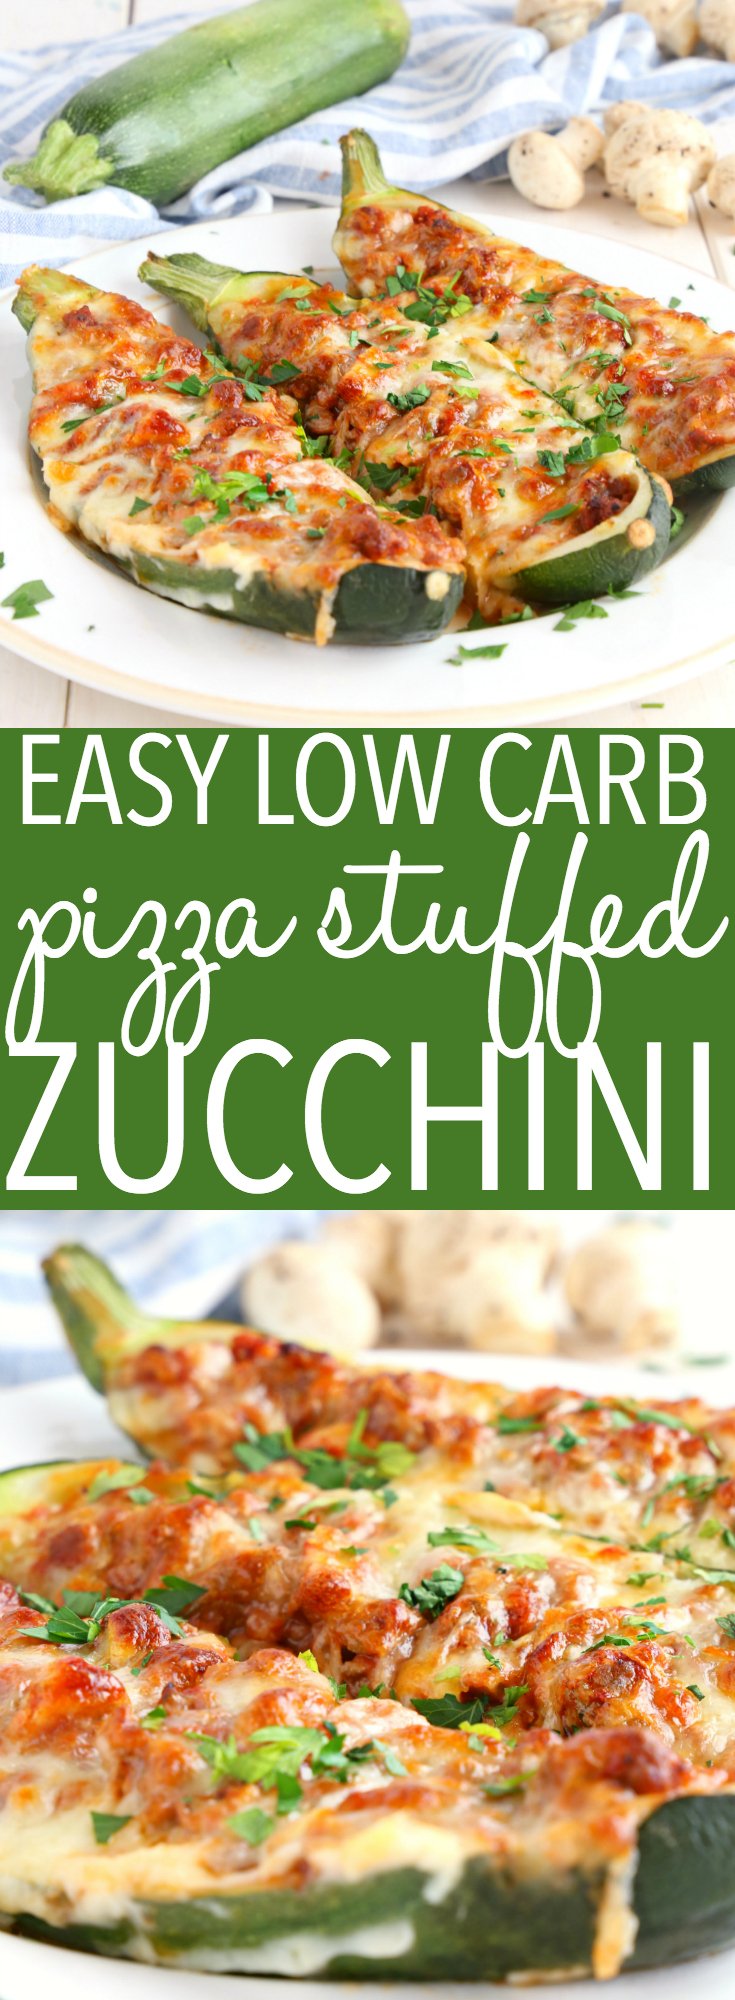 This Easy Low Carb Pizza Stuffed Zucchini is the perfect way to enjoy all those pizza flavours, without the carbs - make this healthy, family-friendly meal in minutes! Recipe from thebusybaker.ca! #keto #Lowcarb #diet #weightloss #fatloss #healthy #pizza #health #zucchini #veggie #family #meal #recipe #foodblog #italian sausage #cheese #quickandeasy via @busybakerblog